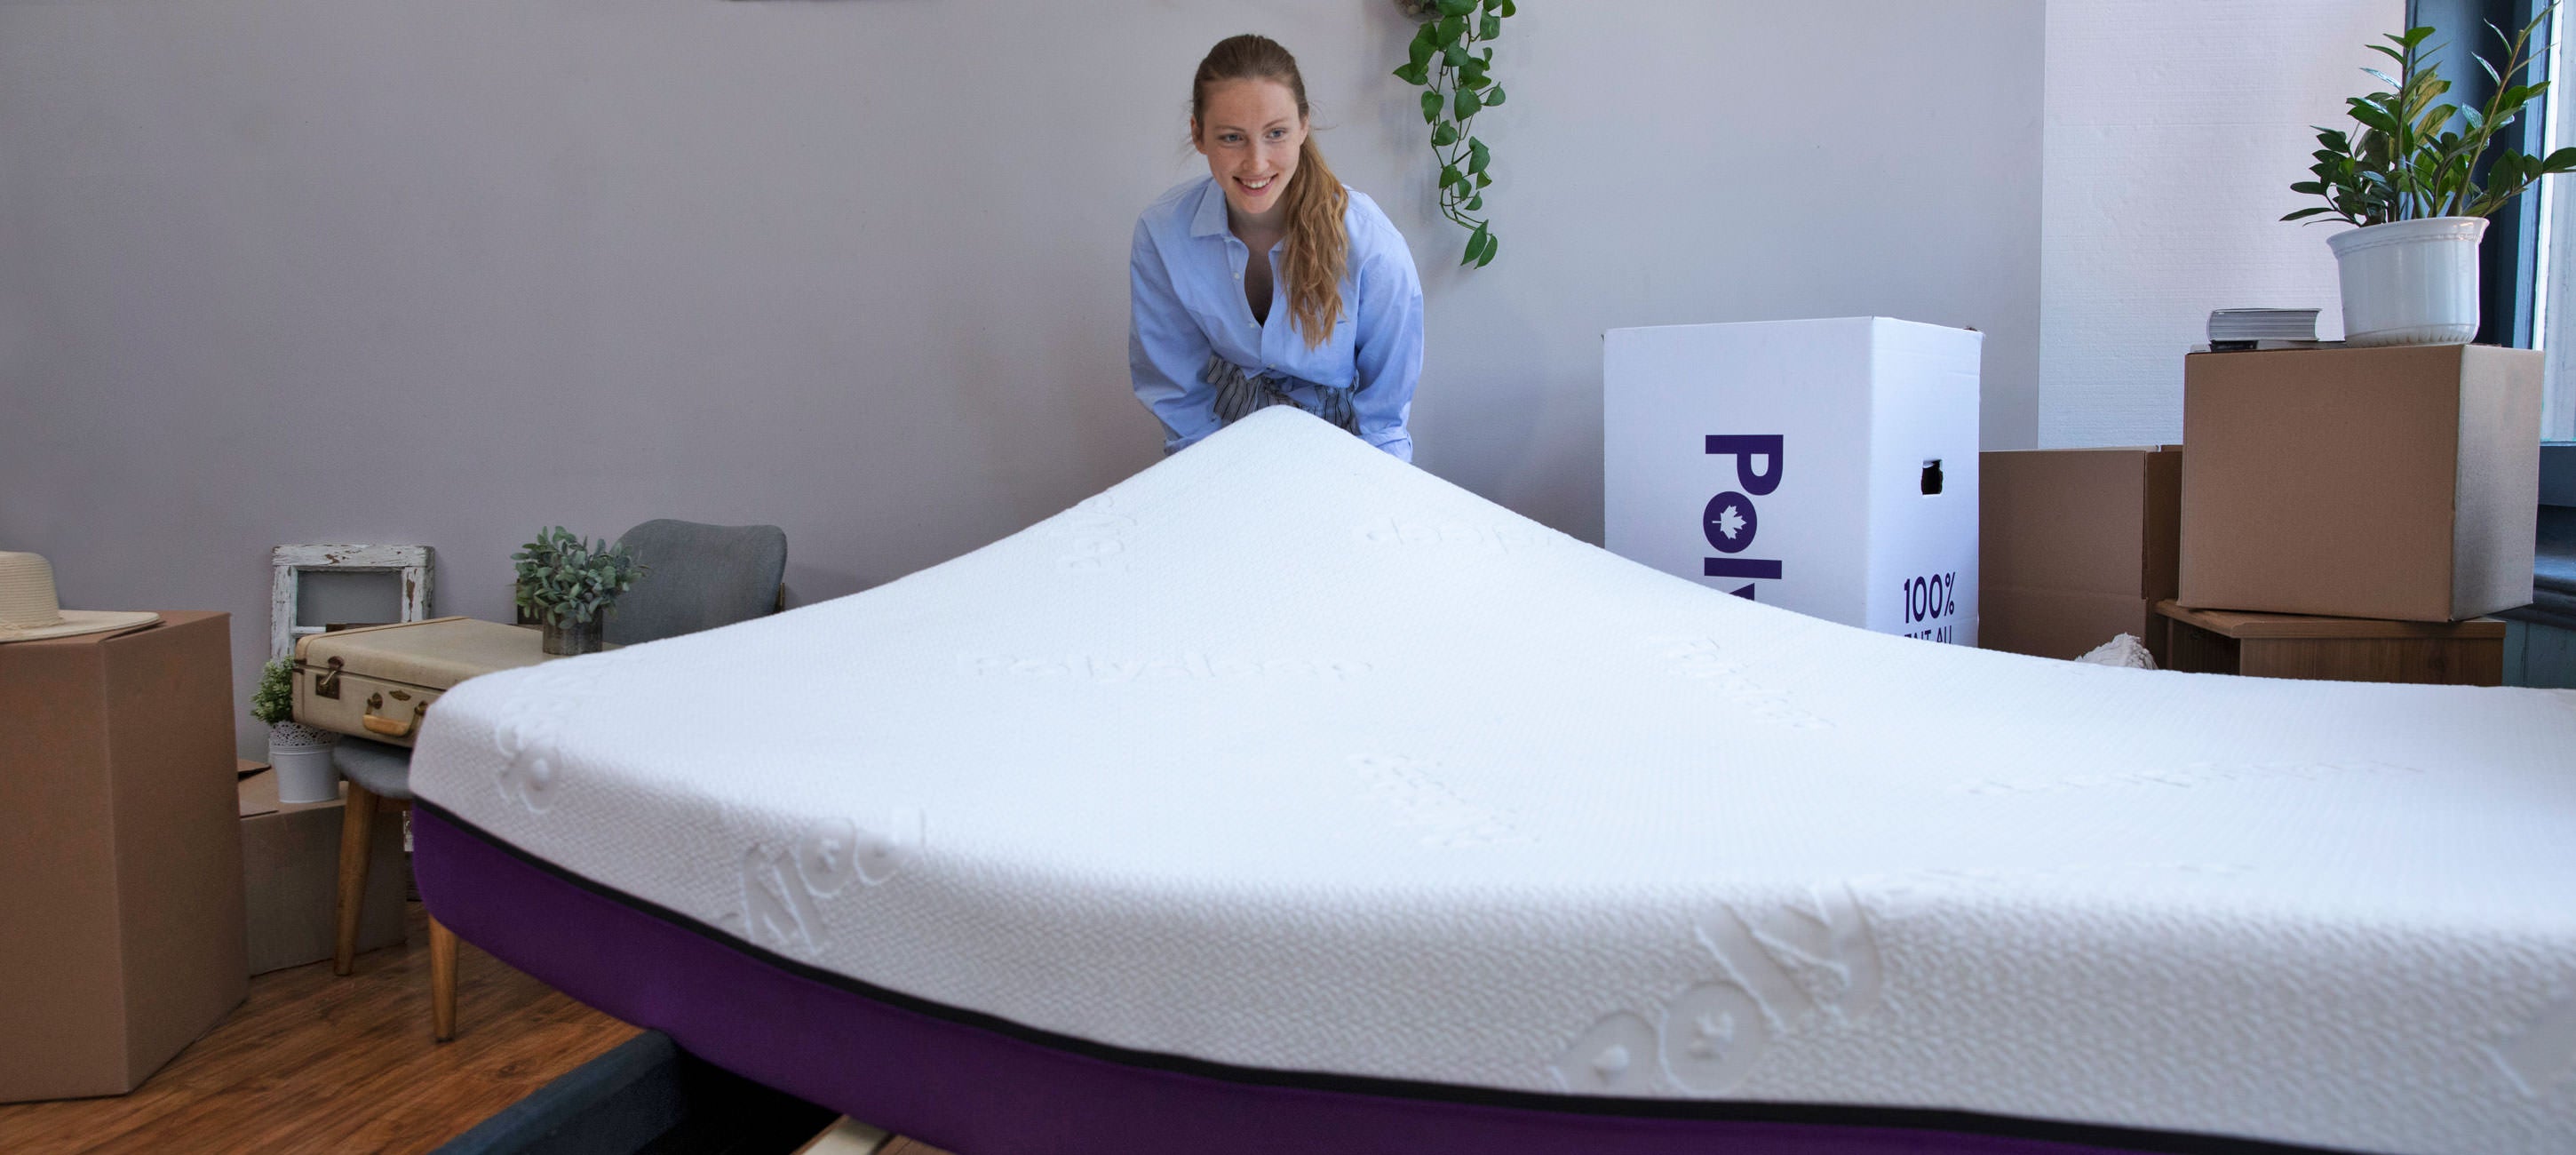 How to Clean Mattress Topper